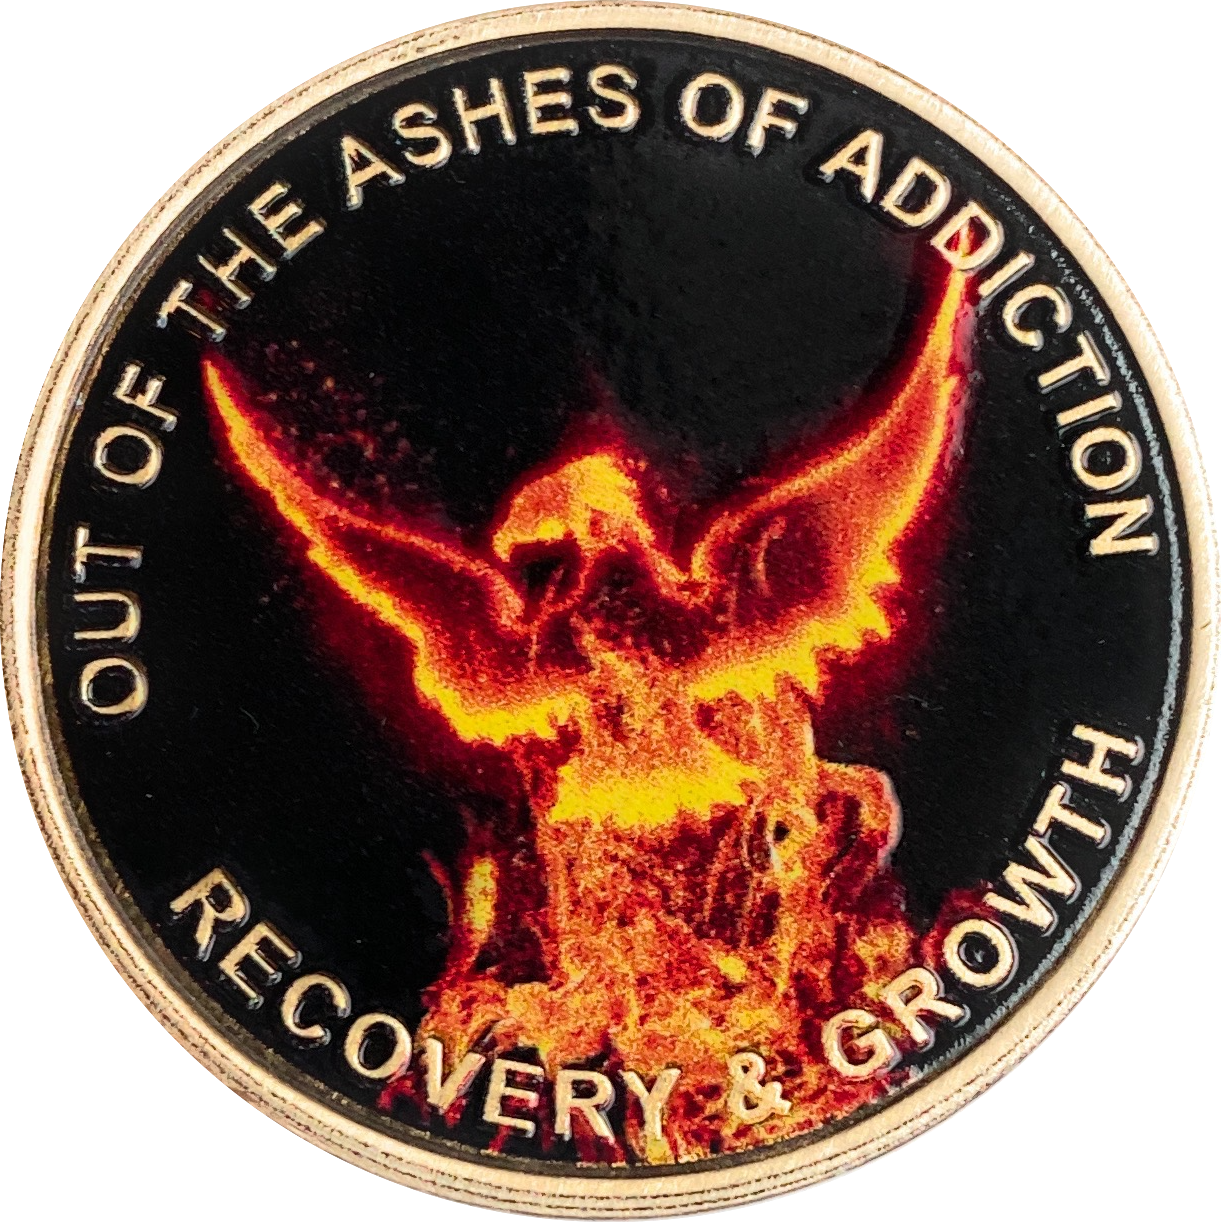 RecoveryChip Out of The Ashes of Addiction Color Phoenix Rising from Flames Sobriety Medallion